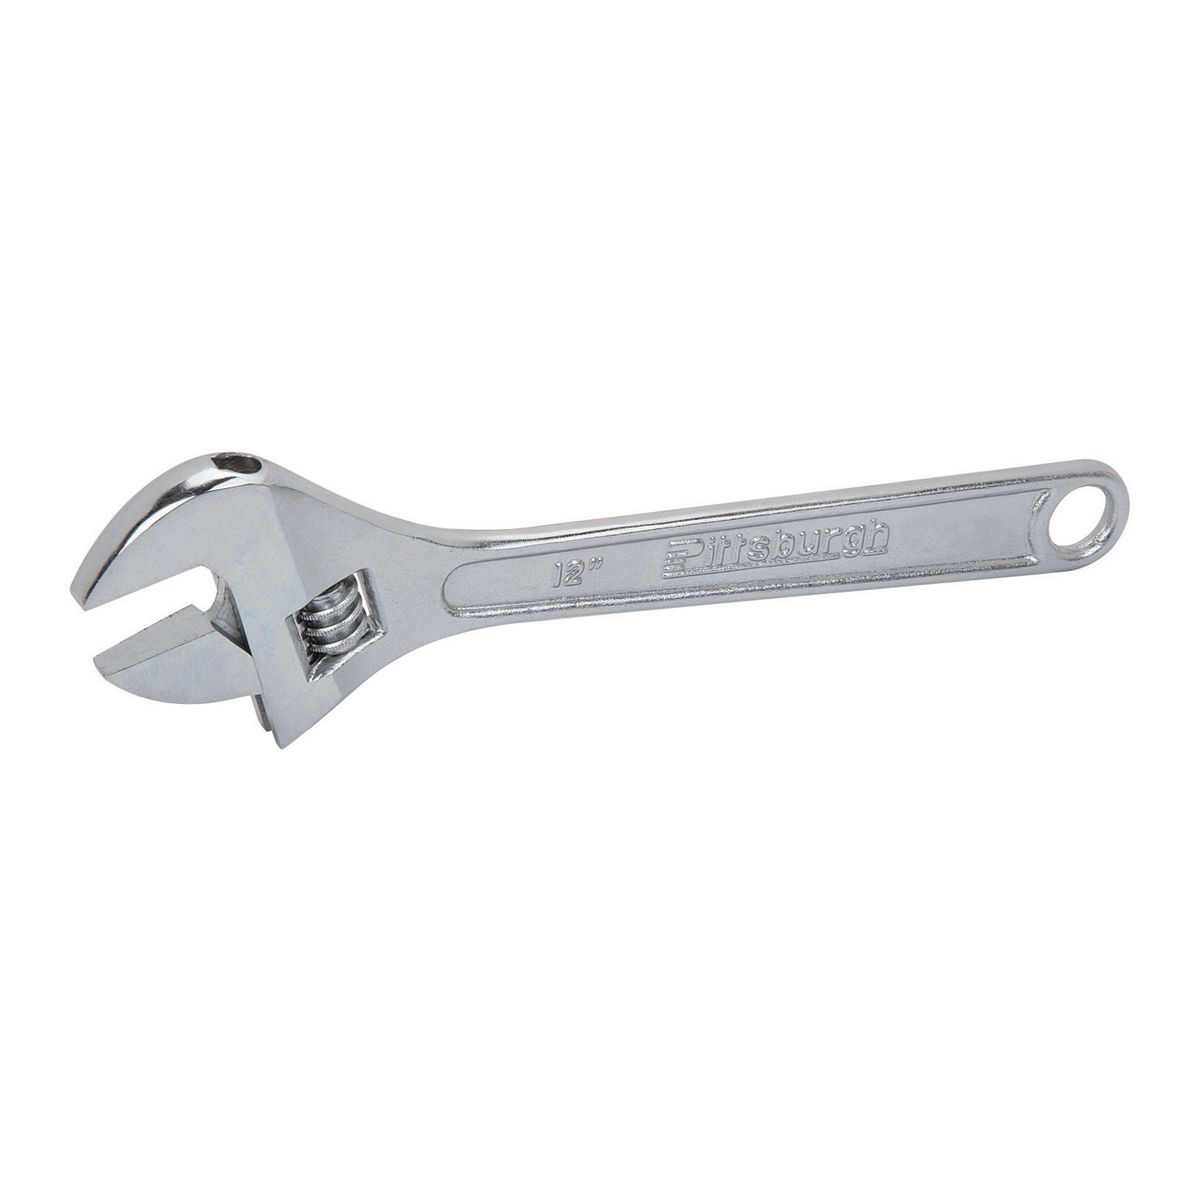 PITTSBURGH 12 in. Steel Adjustable Wrench - Item 65802 / 60717 / 63720 / 69545